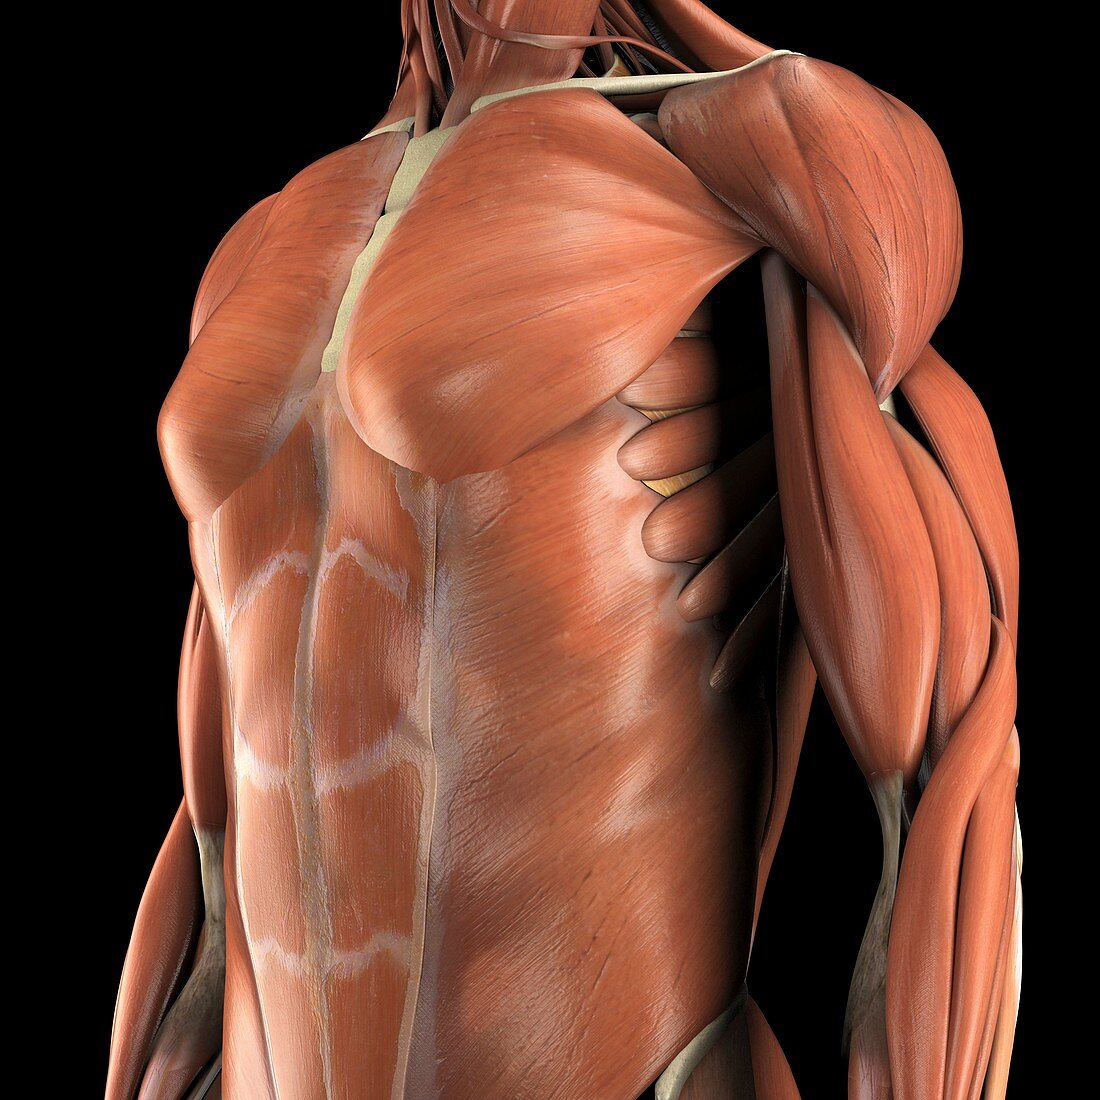 Muscles of the Upper Body, artwork